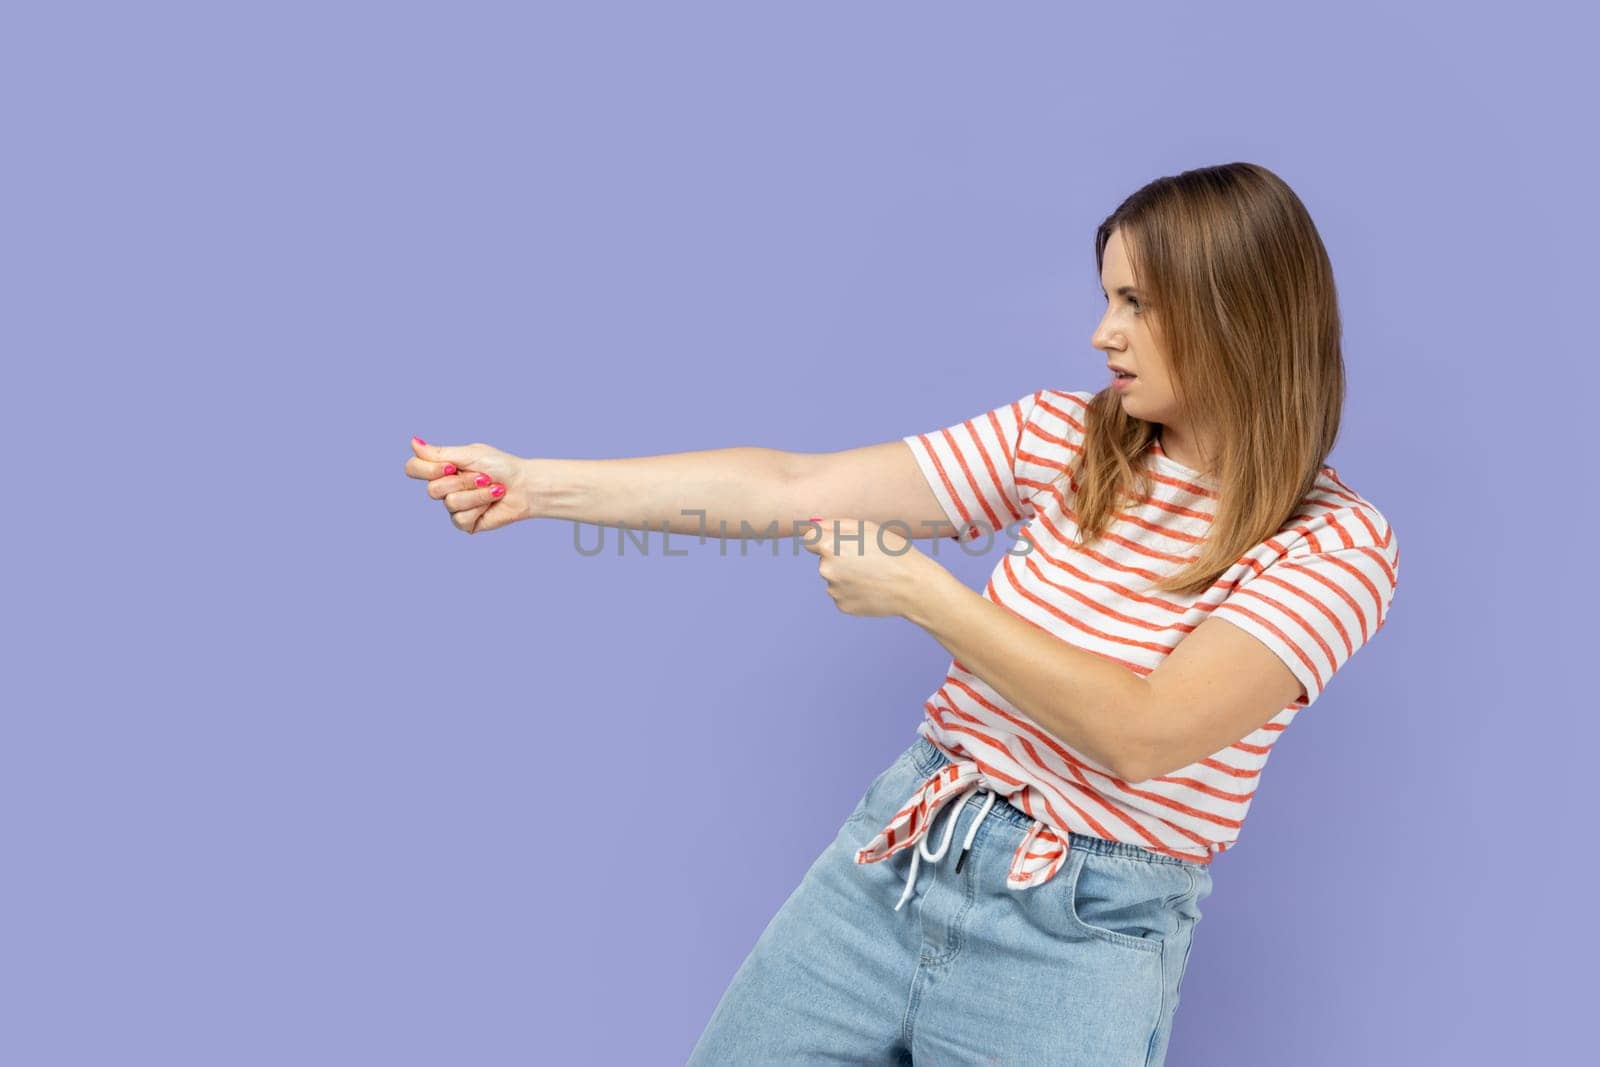 Strong ambitious woman wearing striped T-shirt pretending to pull invisible rope, concept of hard working, striving and efforts to achievements. Indoor studio shot isolated on purple background.